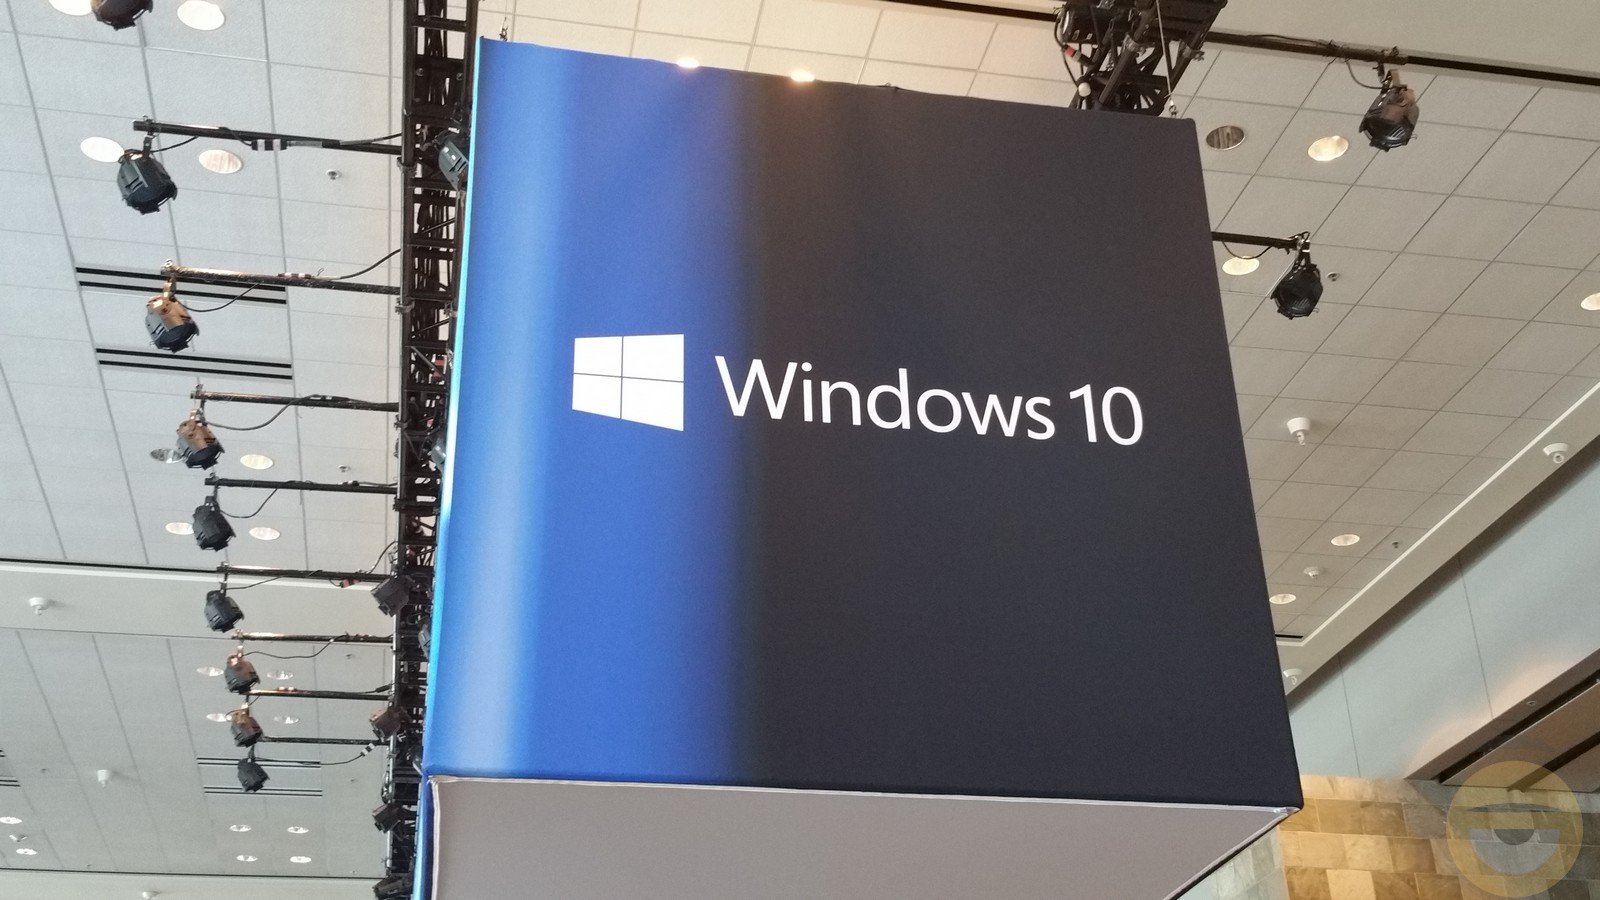 Microsoft will end selling Windows 10 licenses to consumers this month – Windows 10